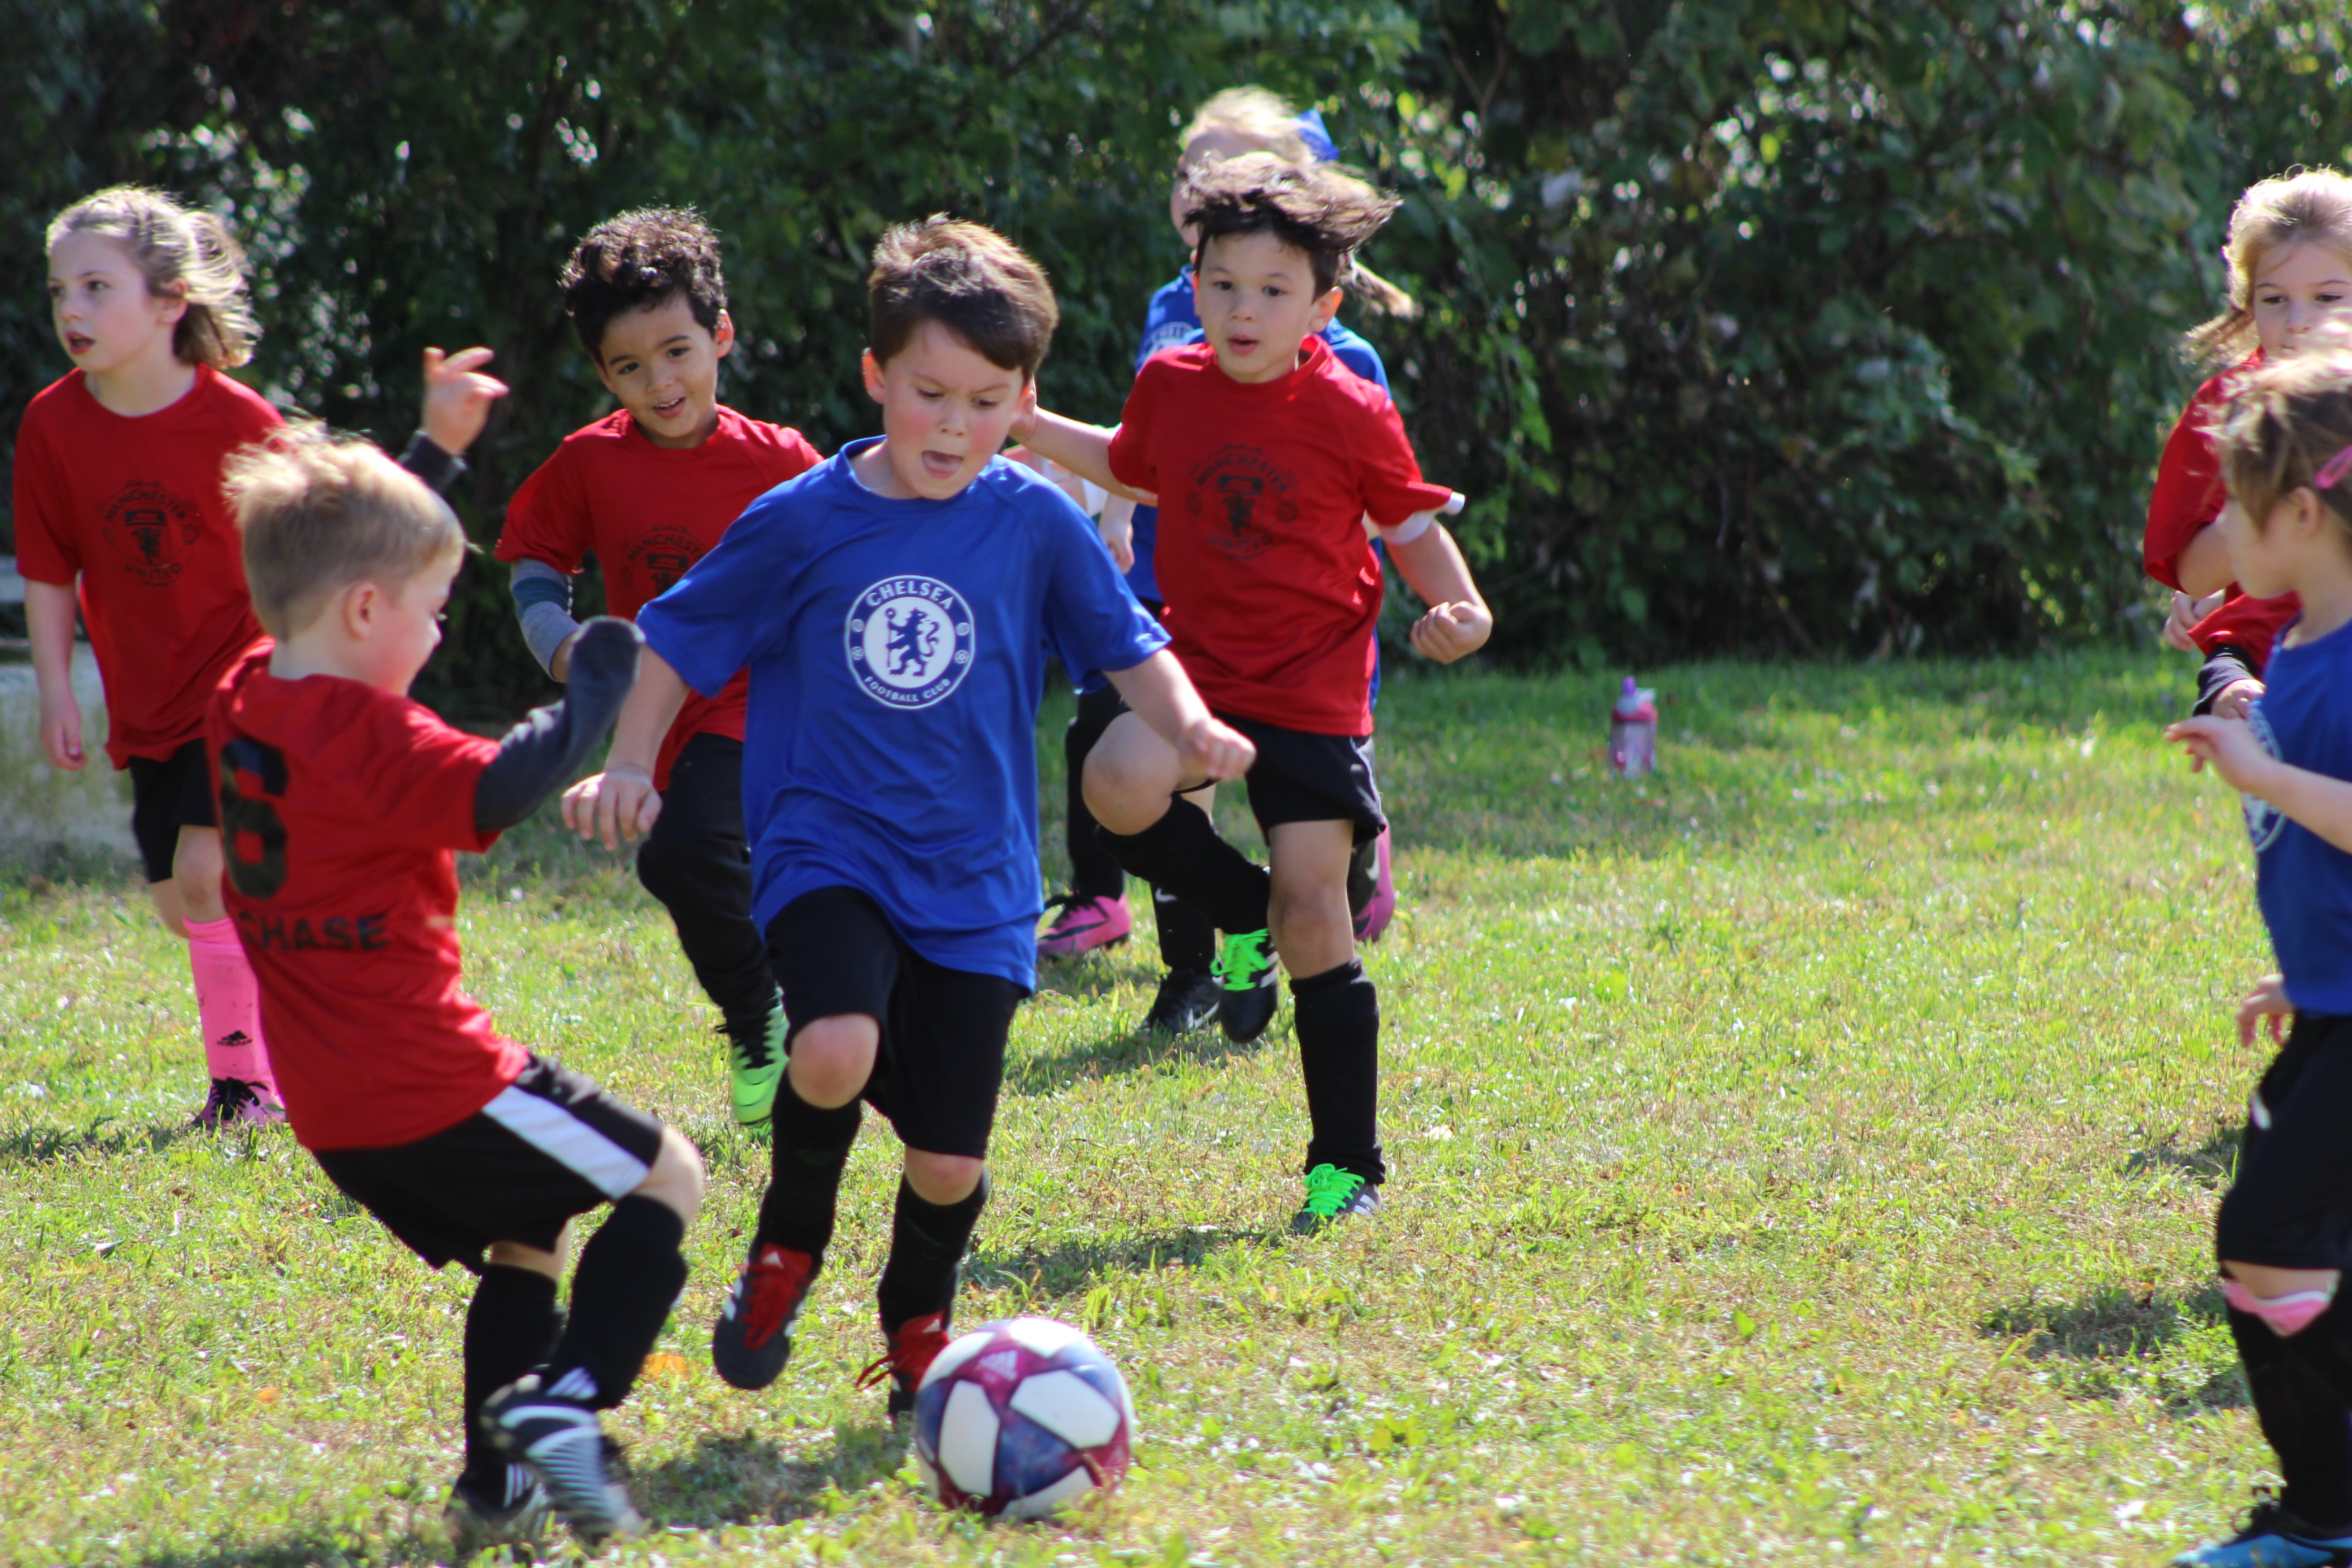 kids playing soccer preventing abuse in youth sports